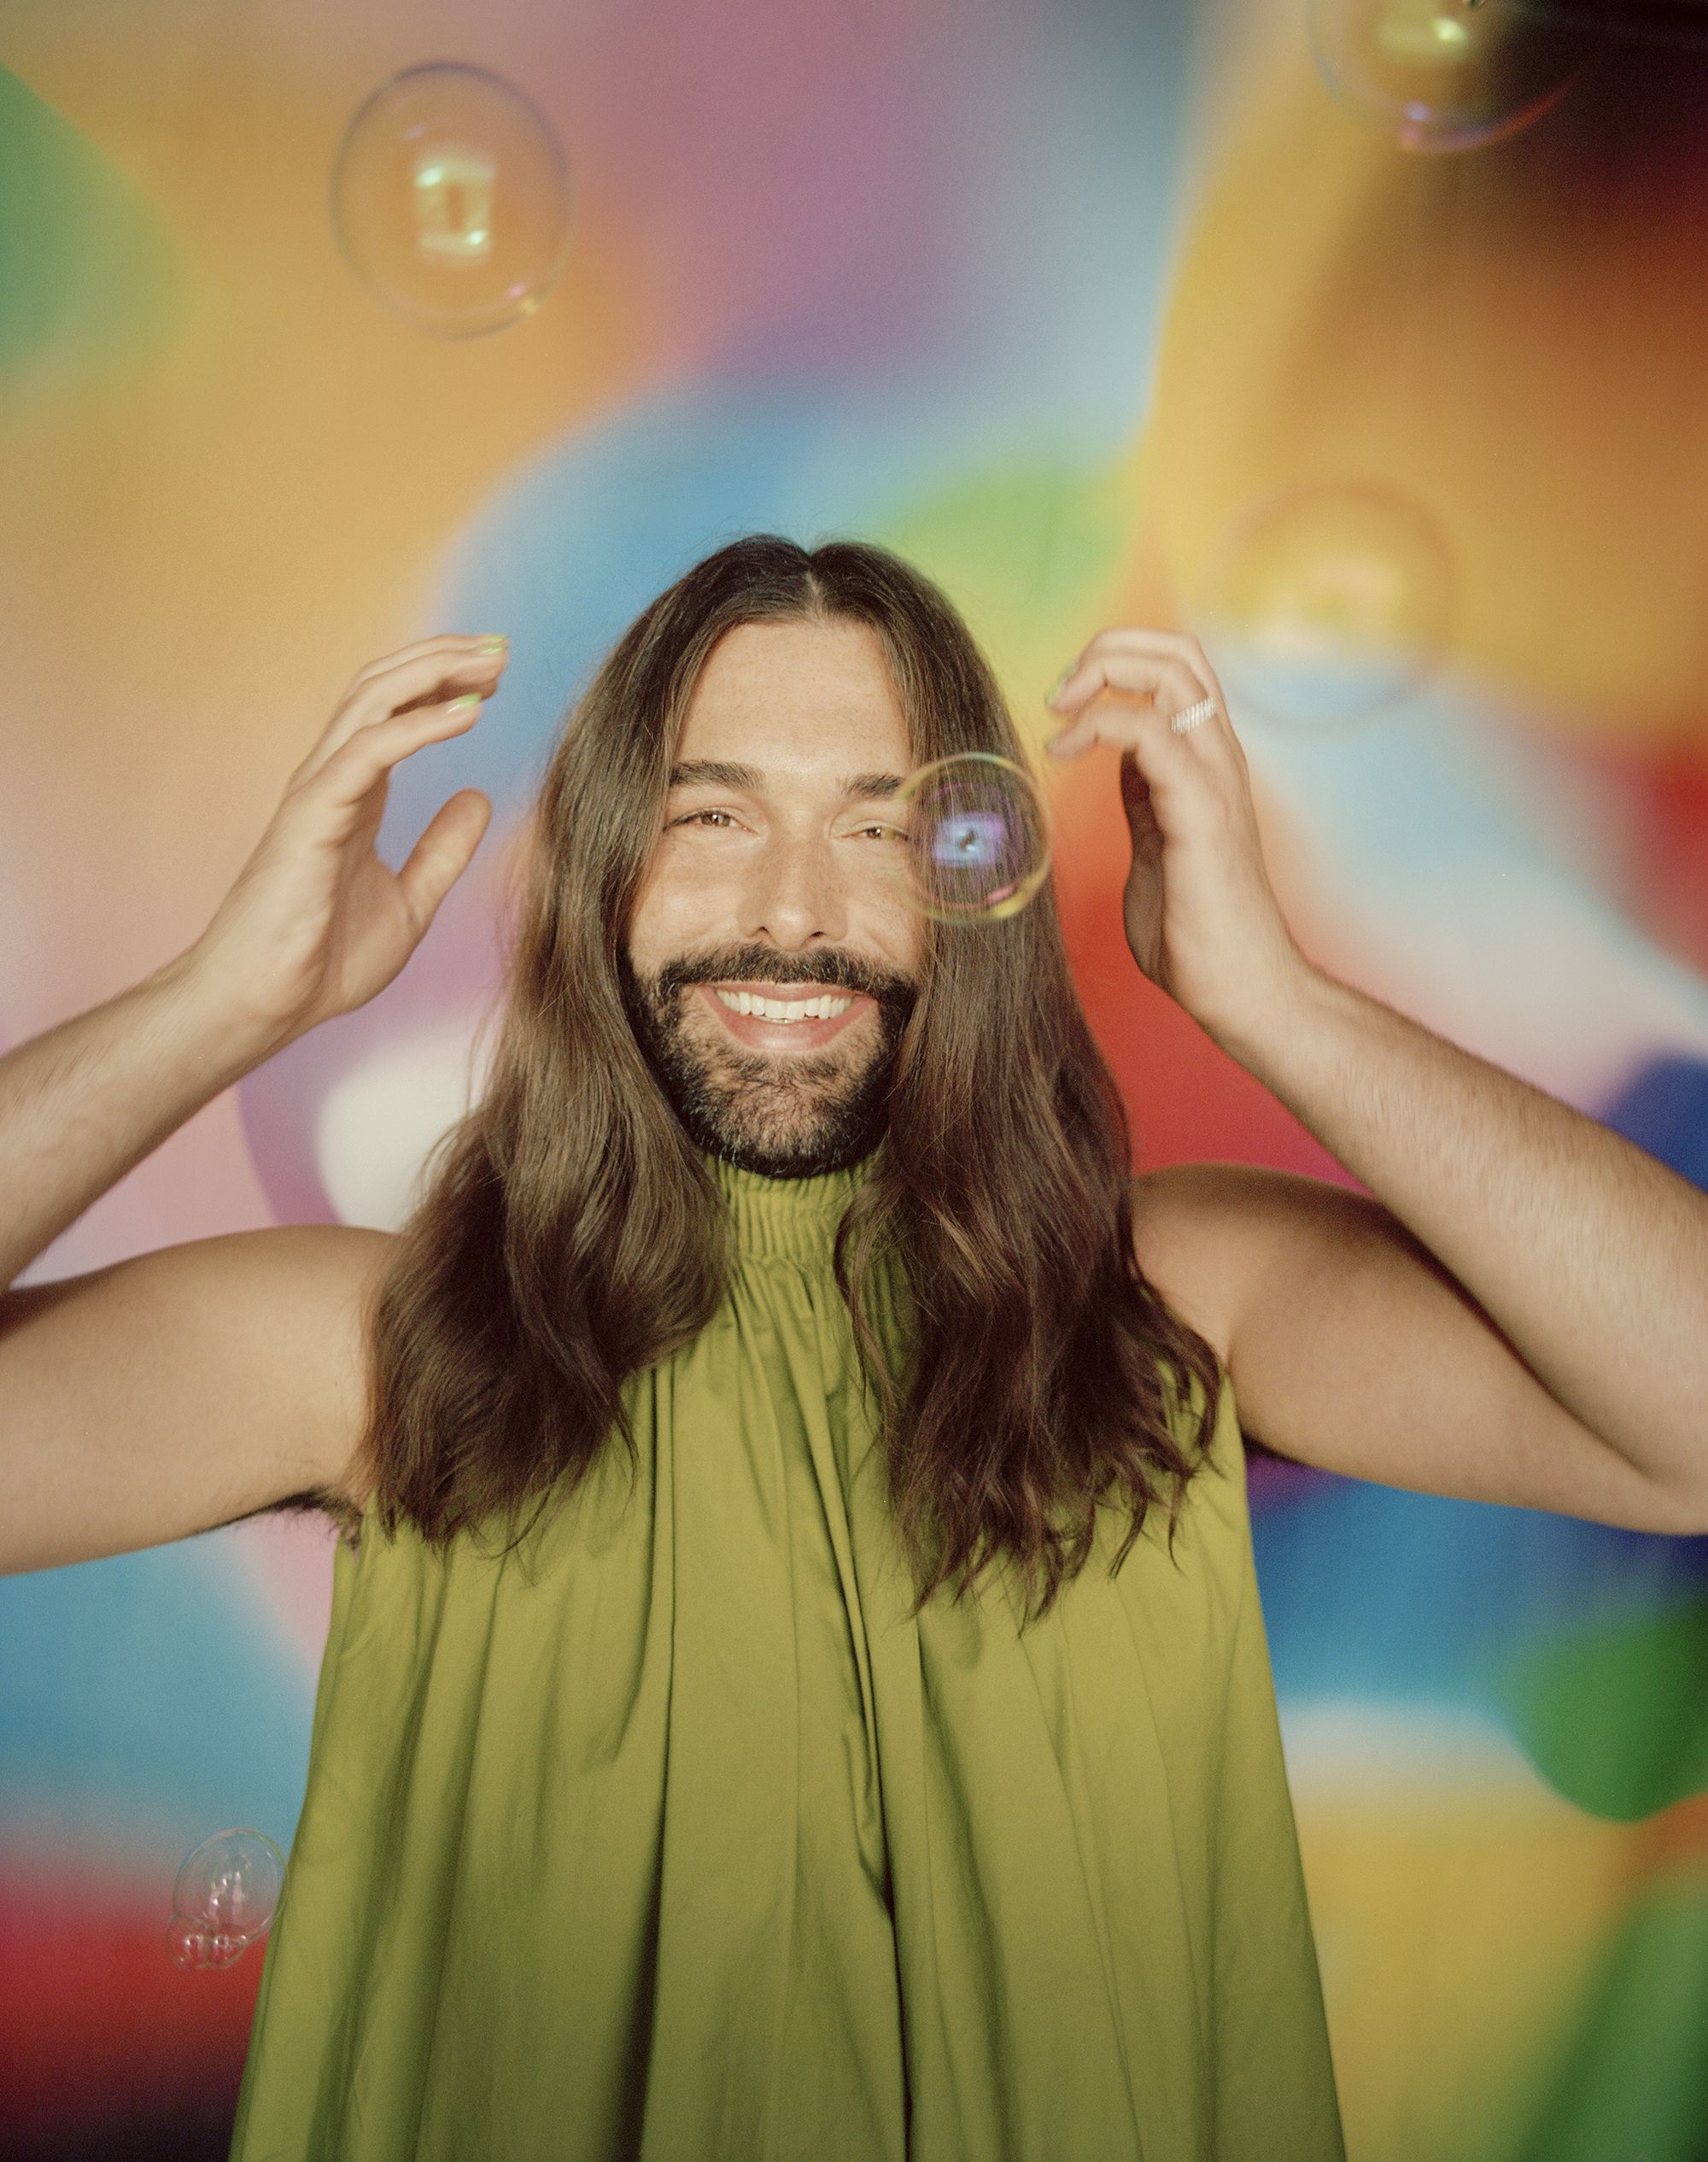 JVN hair care review: What you should know about Johnathan Van